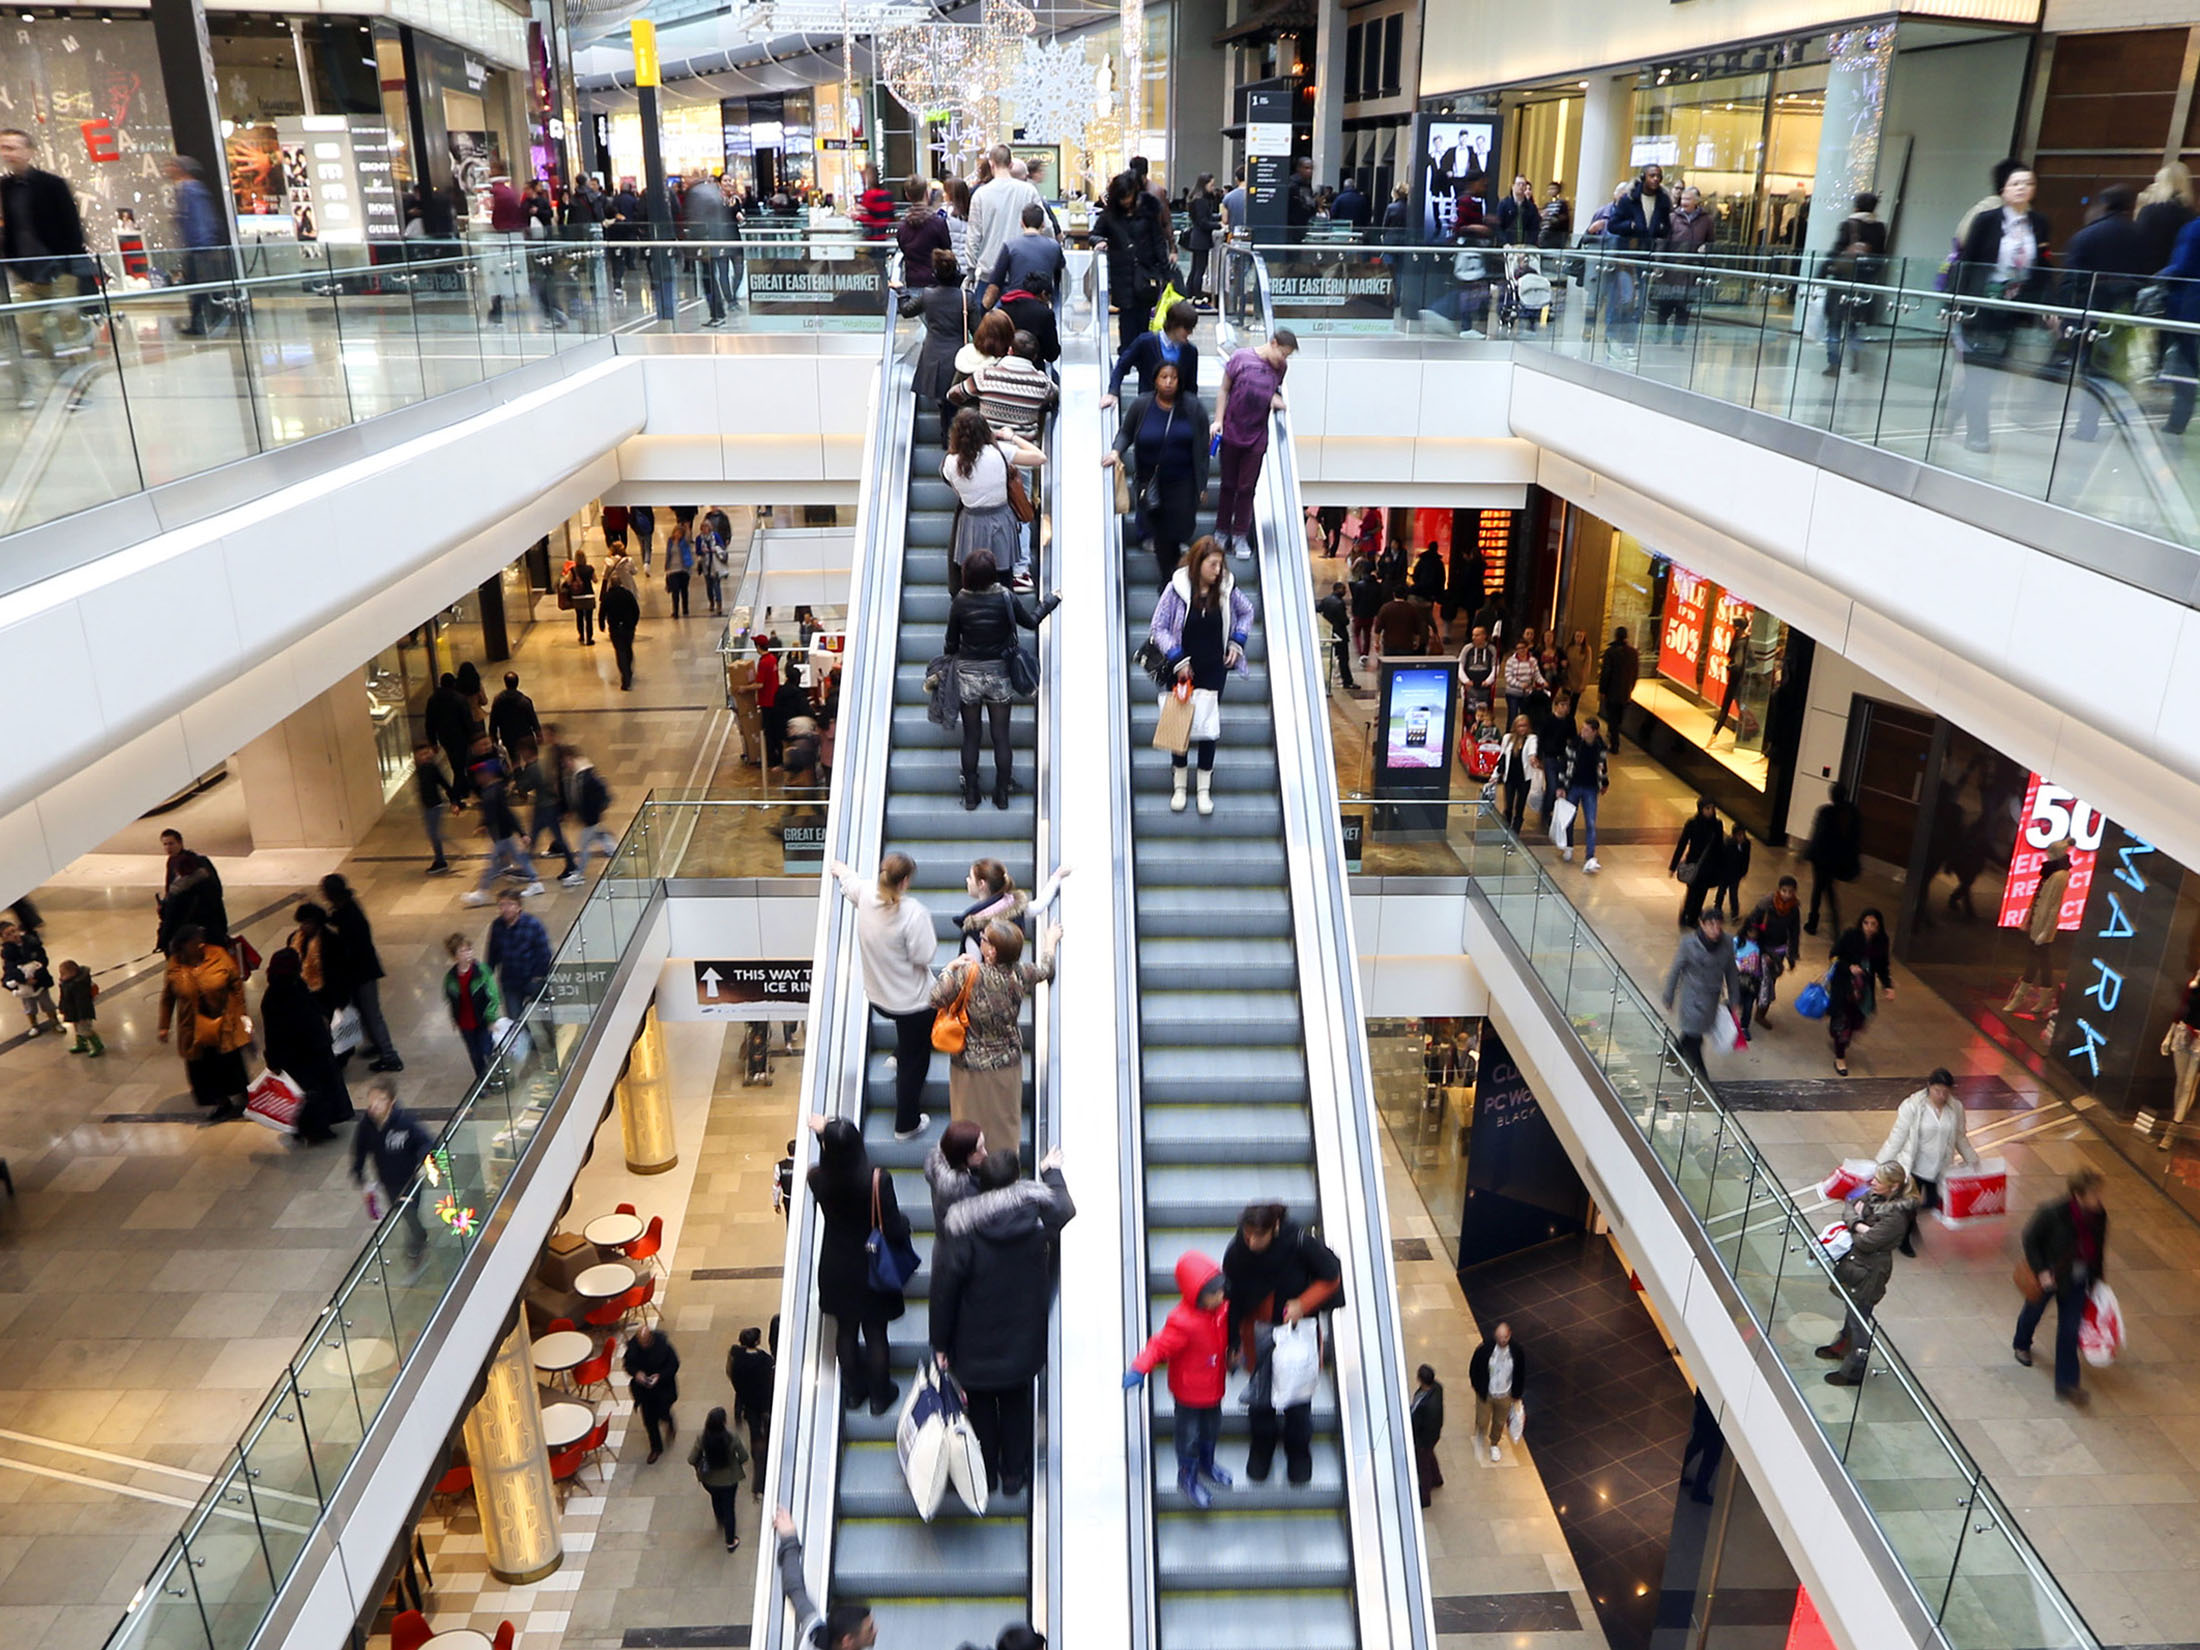 Westfield to Claim 'Largest Shopping Centre in Europe' Title